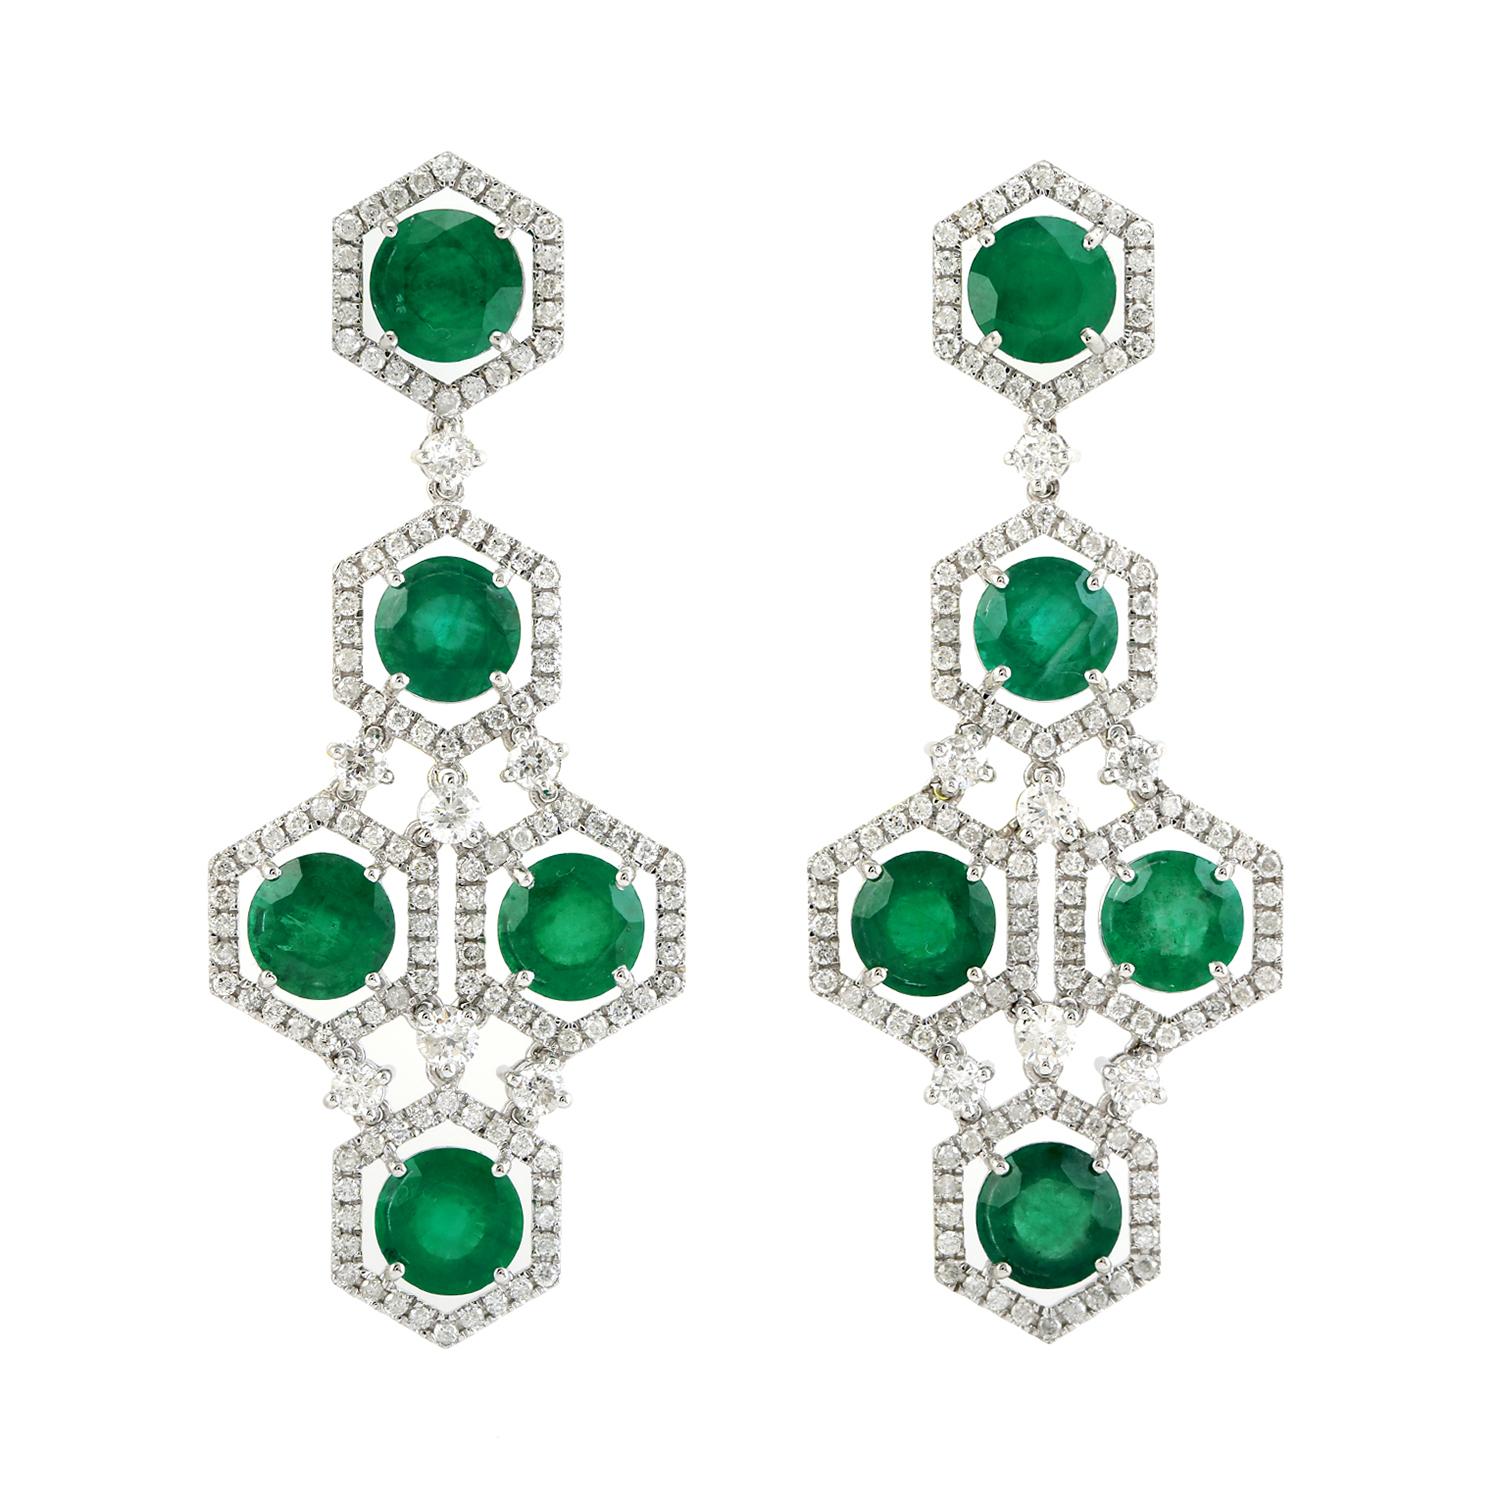 Mixed Cut Round Emerald Long Earrings With Diamonds Made In 18k White Gold For Sale